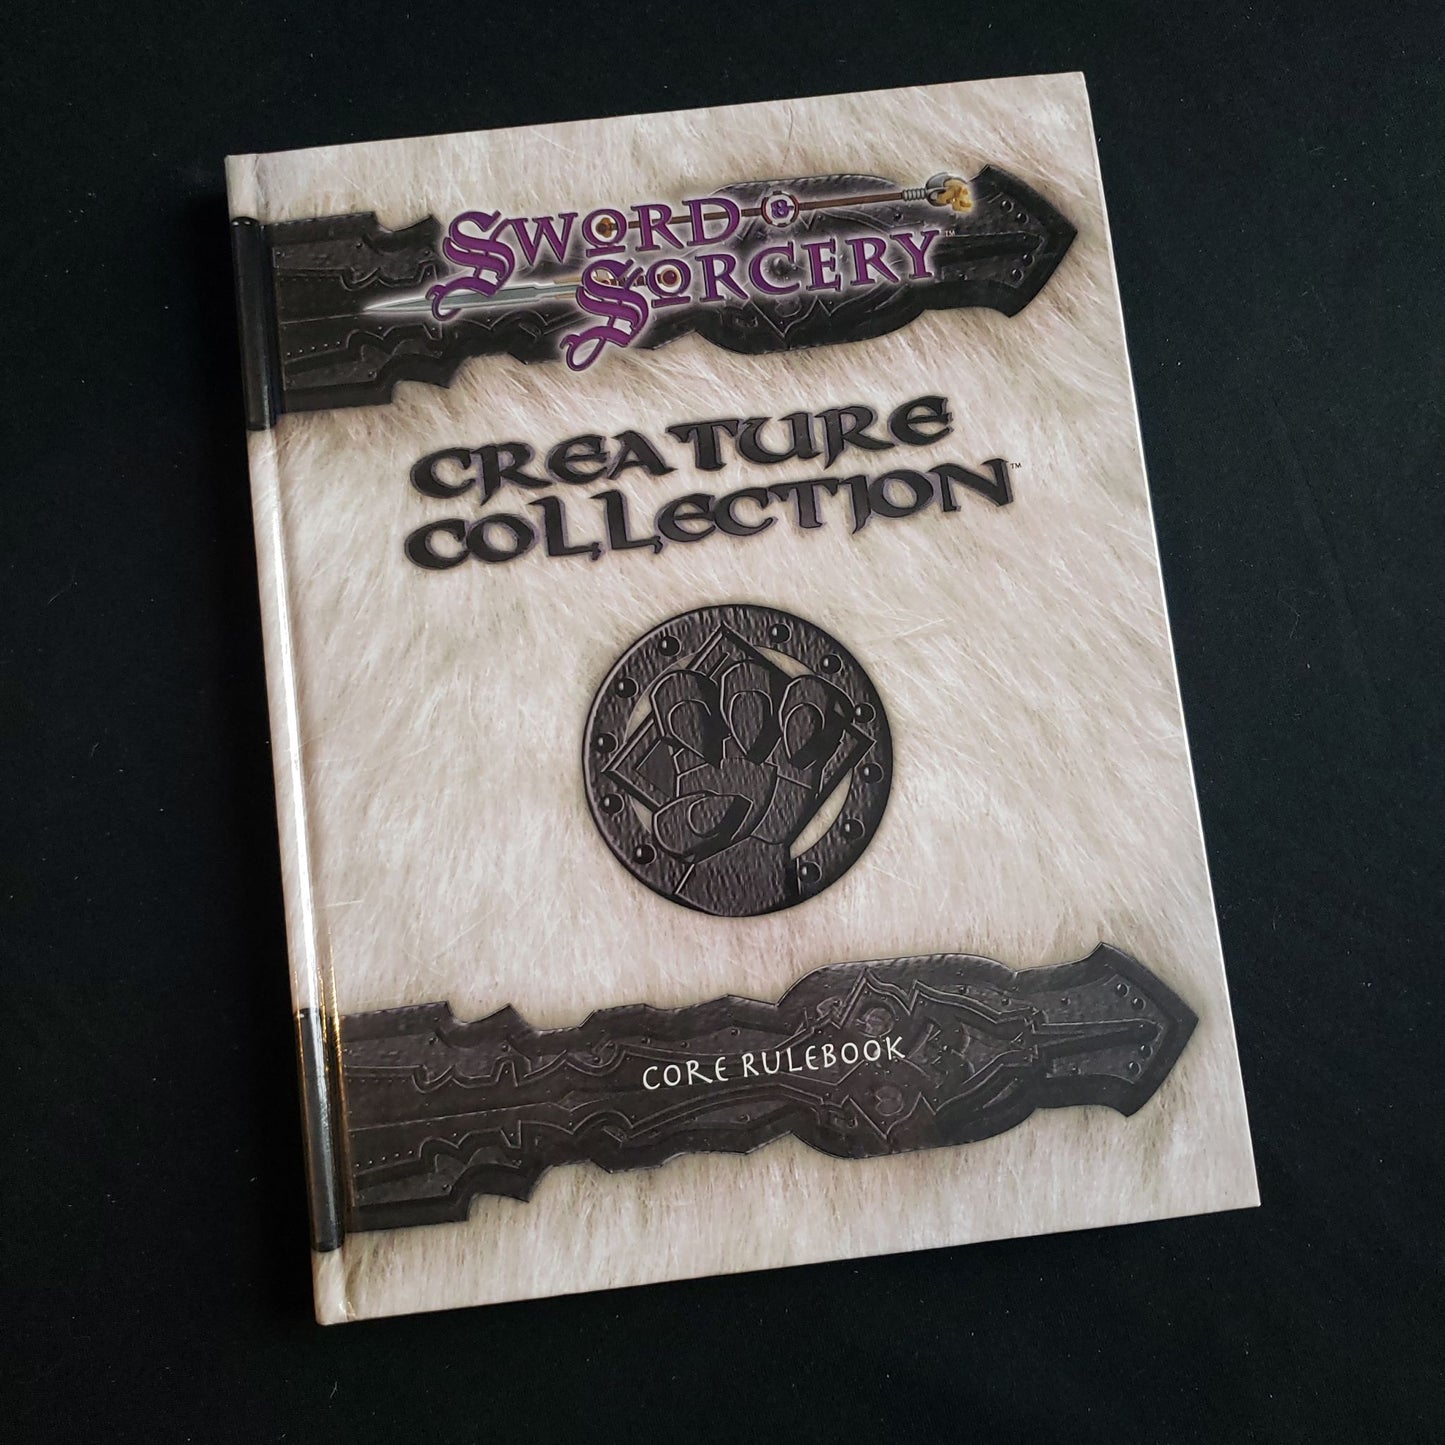 Image shows the front cover of the Creature Collection book for the Sword & Sorcery roleplaying game